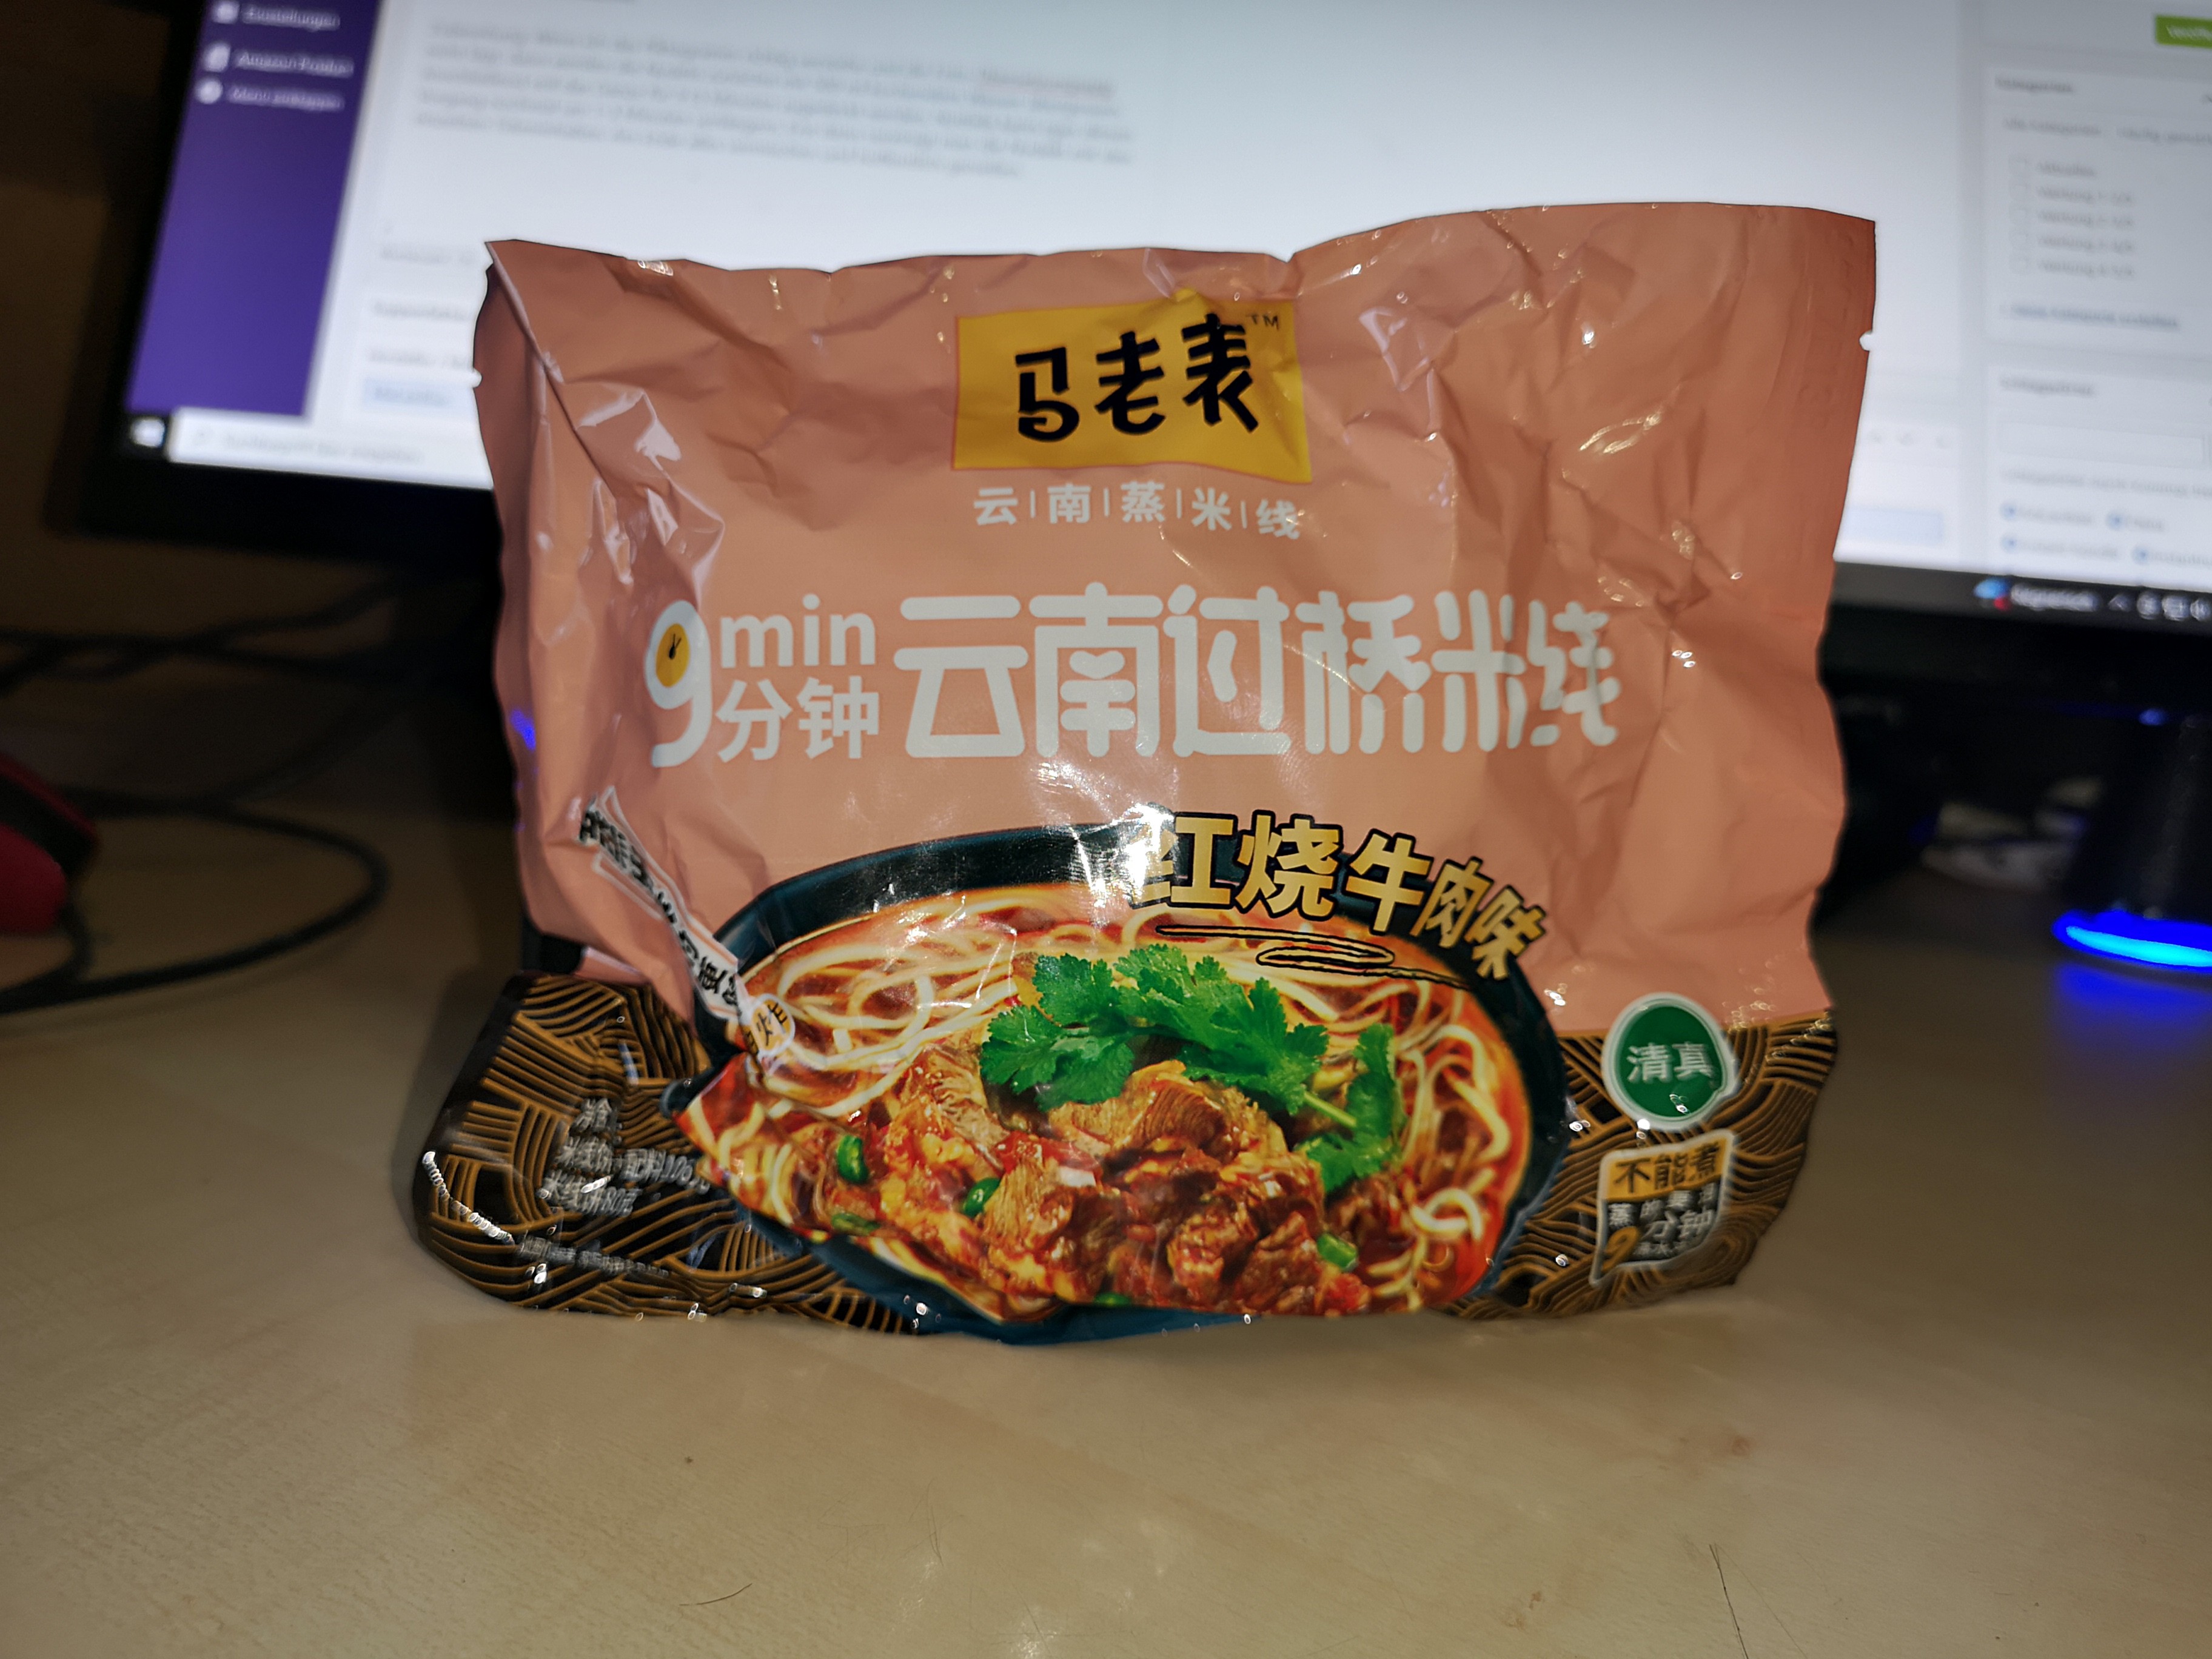 #2343: MaLaoBiao Instant Noodle "Artificial Braised Beef Flavour"